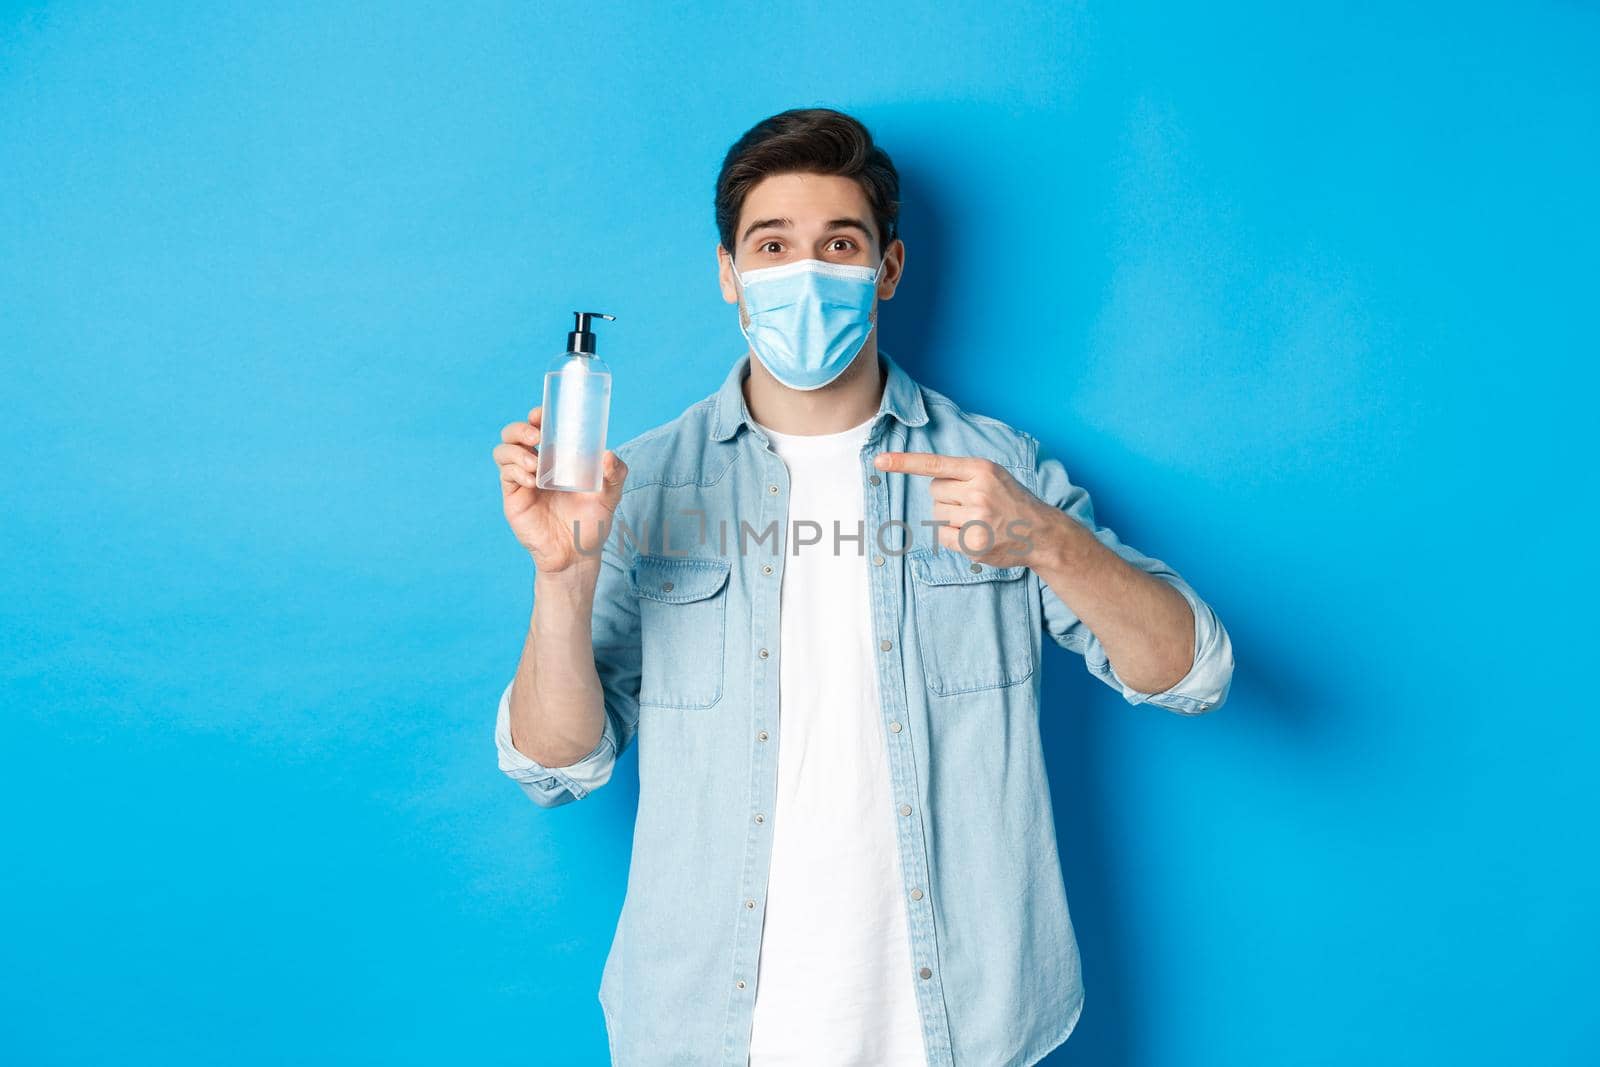 Concept of covid-19, pandemic and social distancing. Handsome guy in medical mask advice to use hand sanitizer, pointing at antiseptic, standing over blue background.